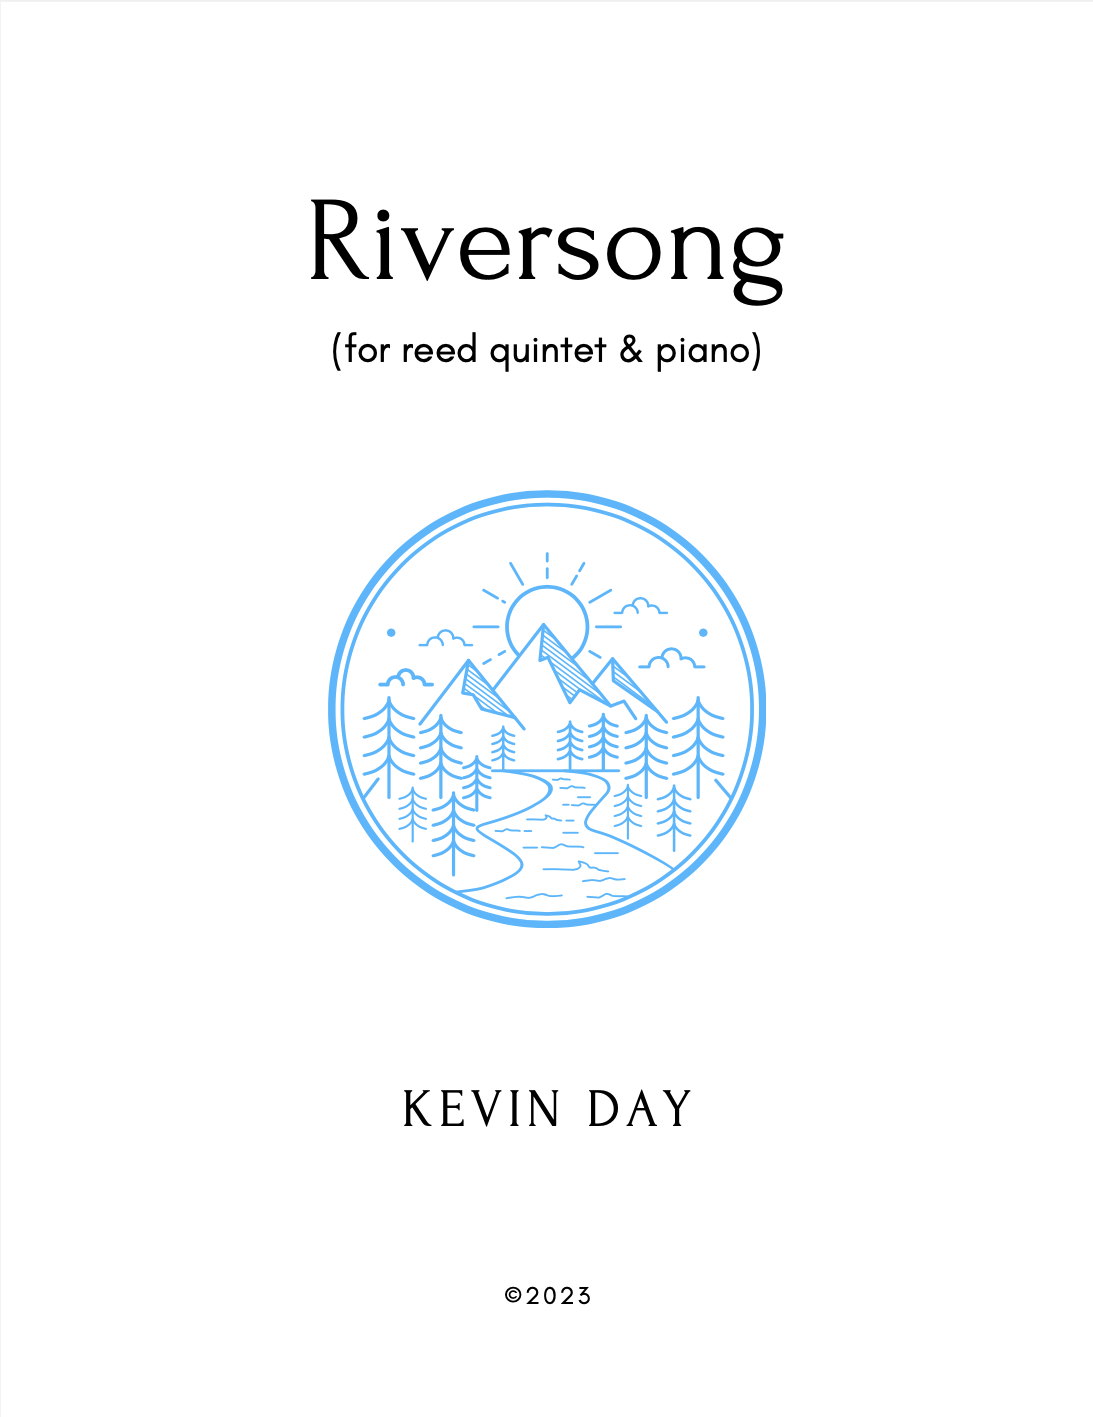 Riversong by Kevin Day